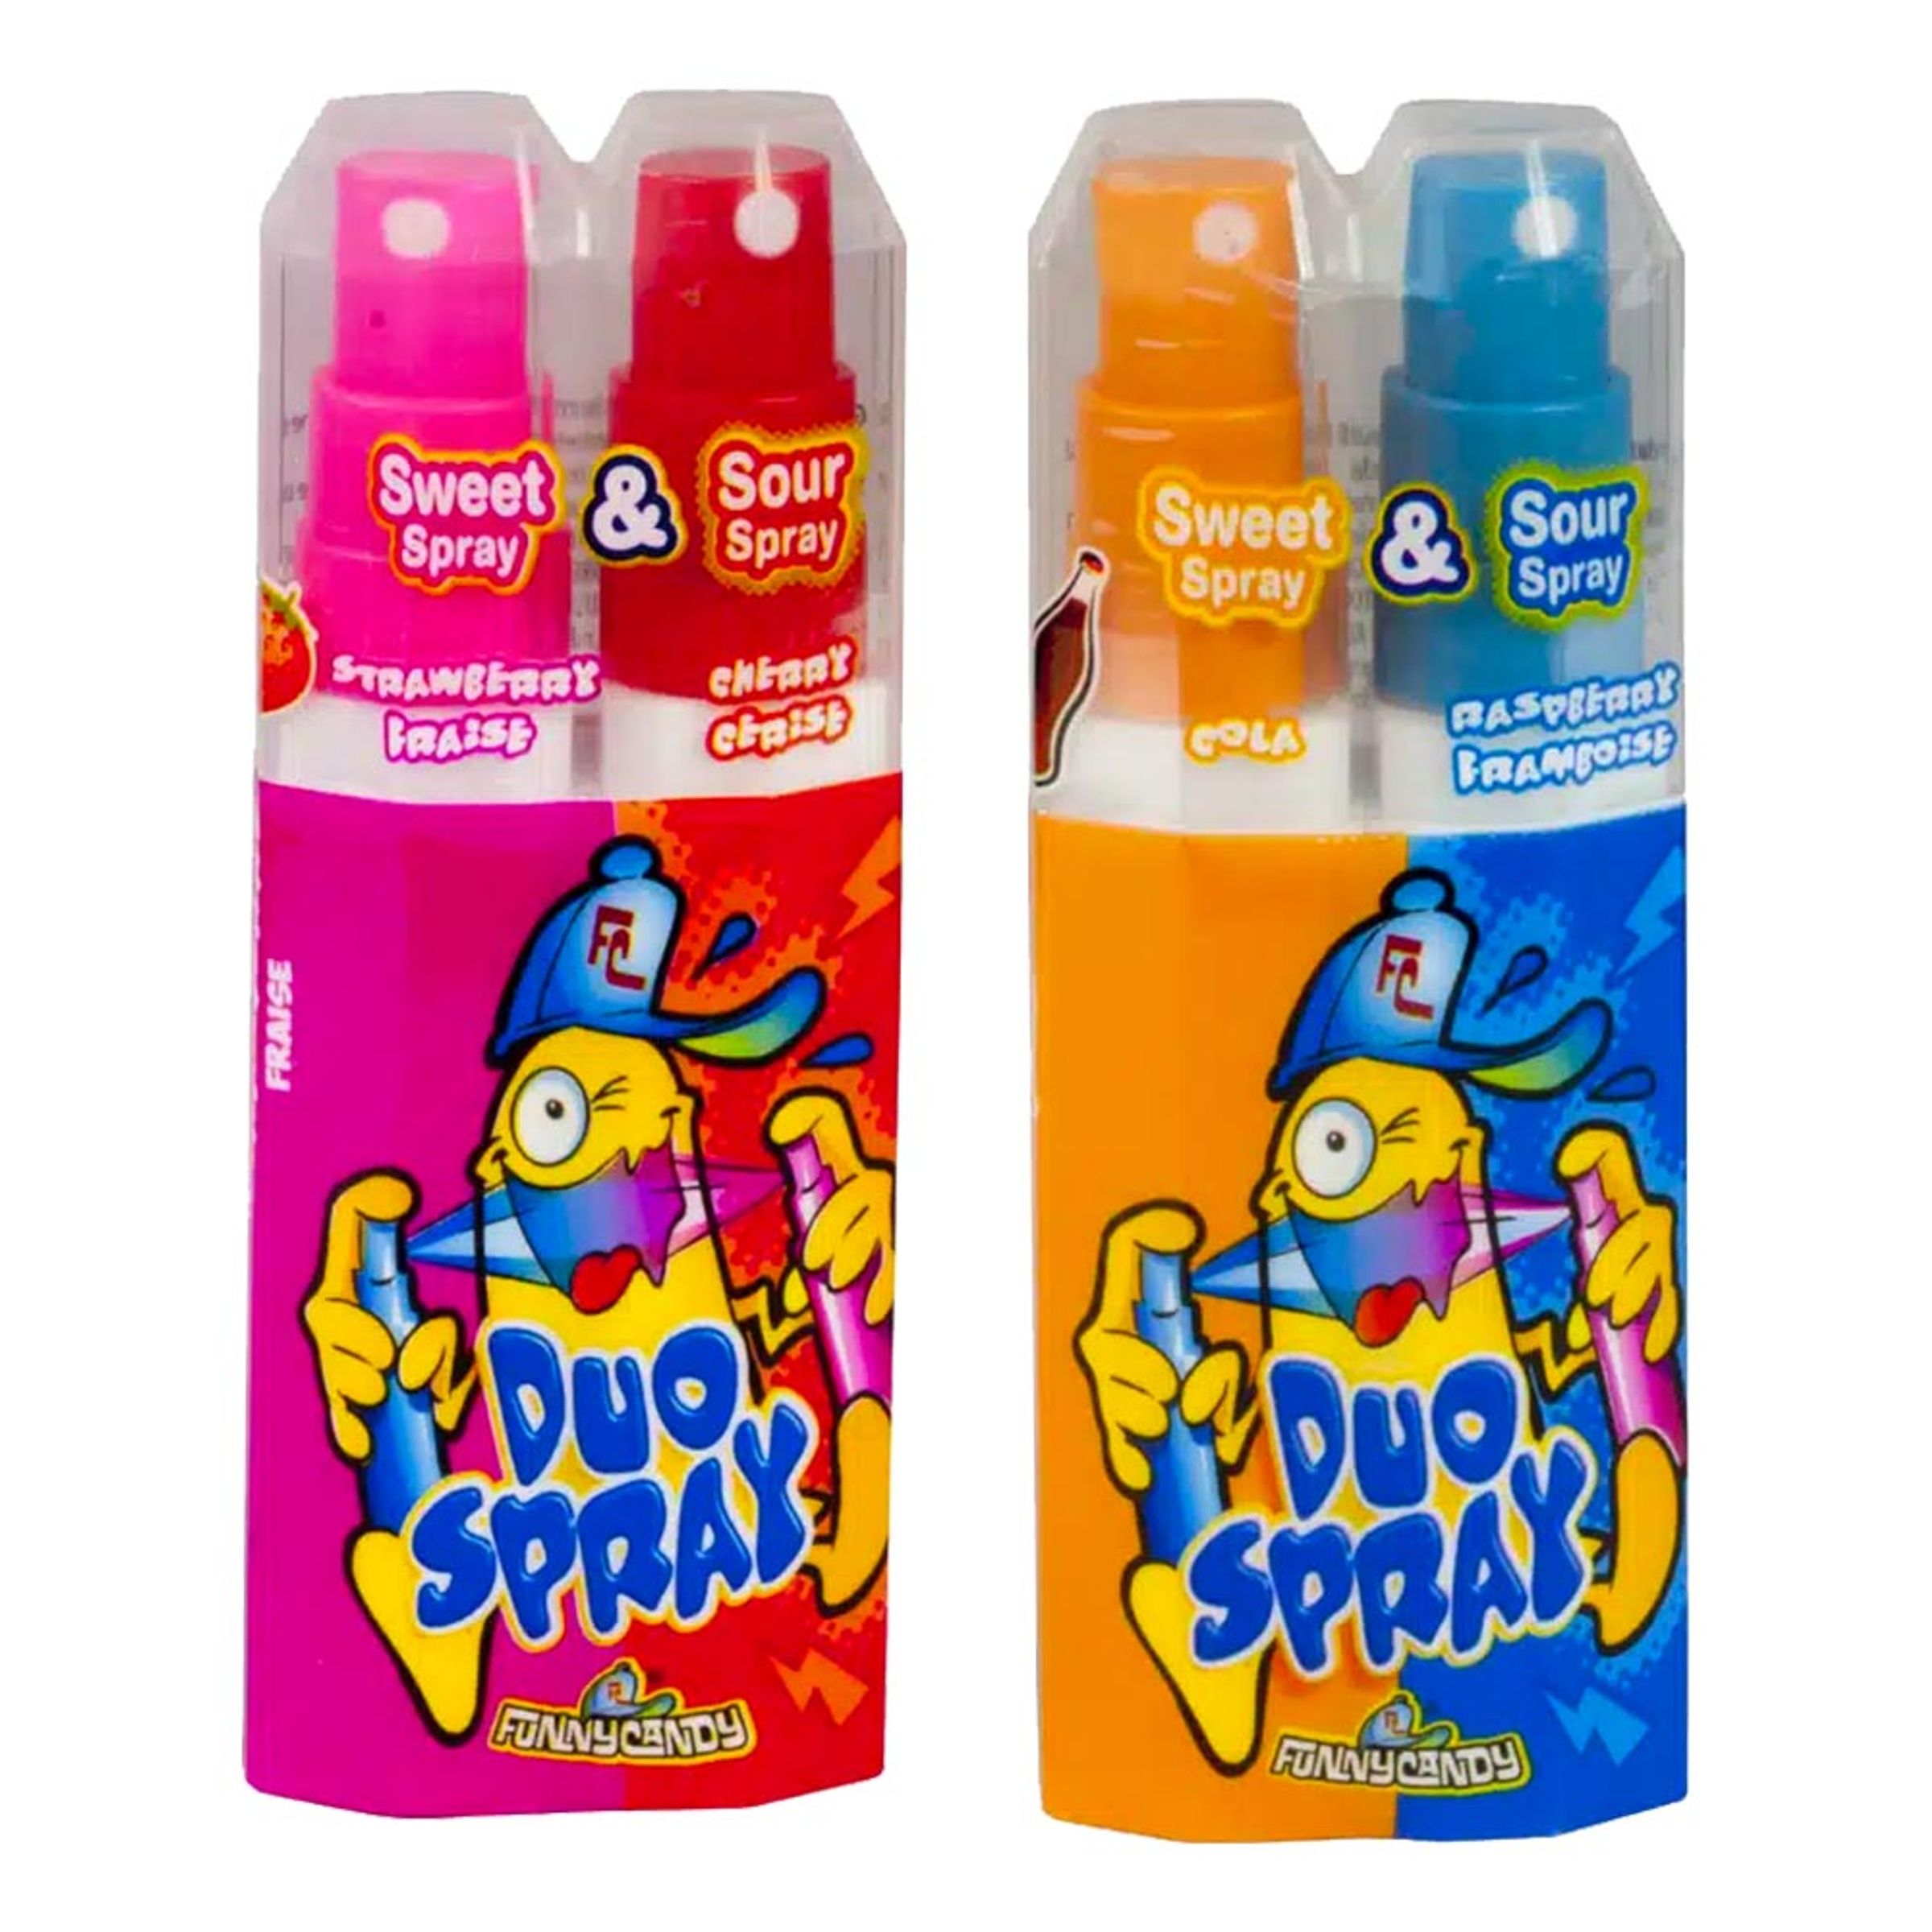 Duo Spray Candy Storpack - 16-pack